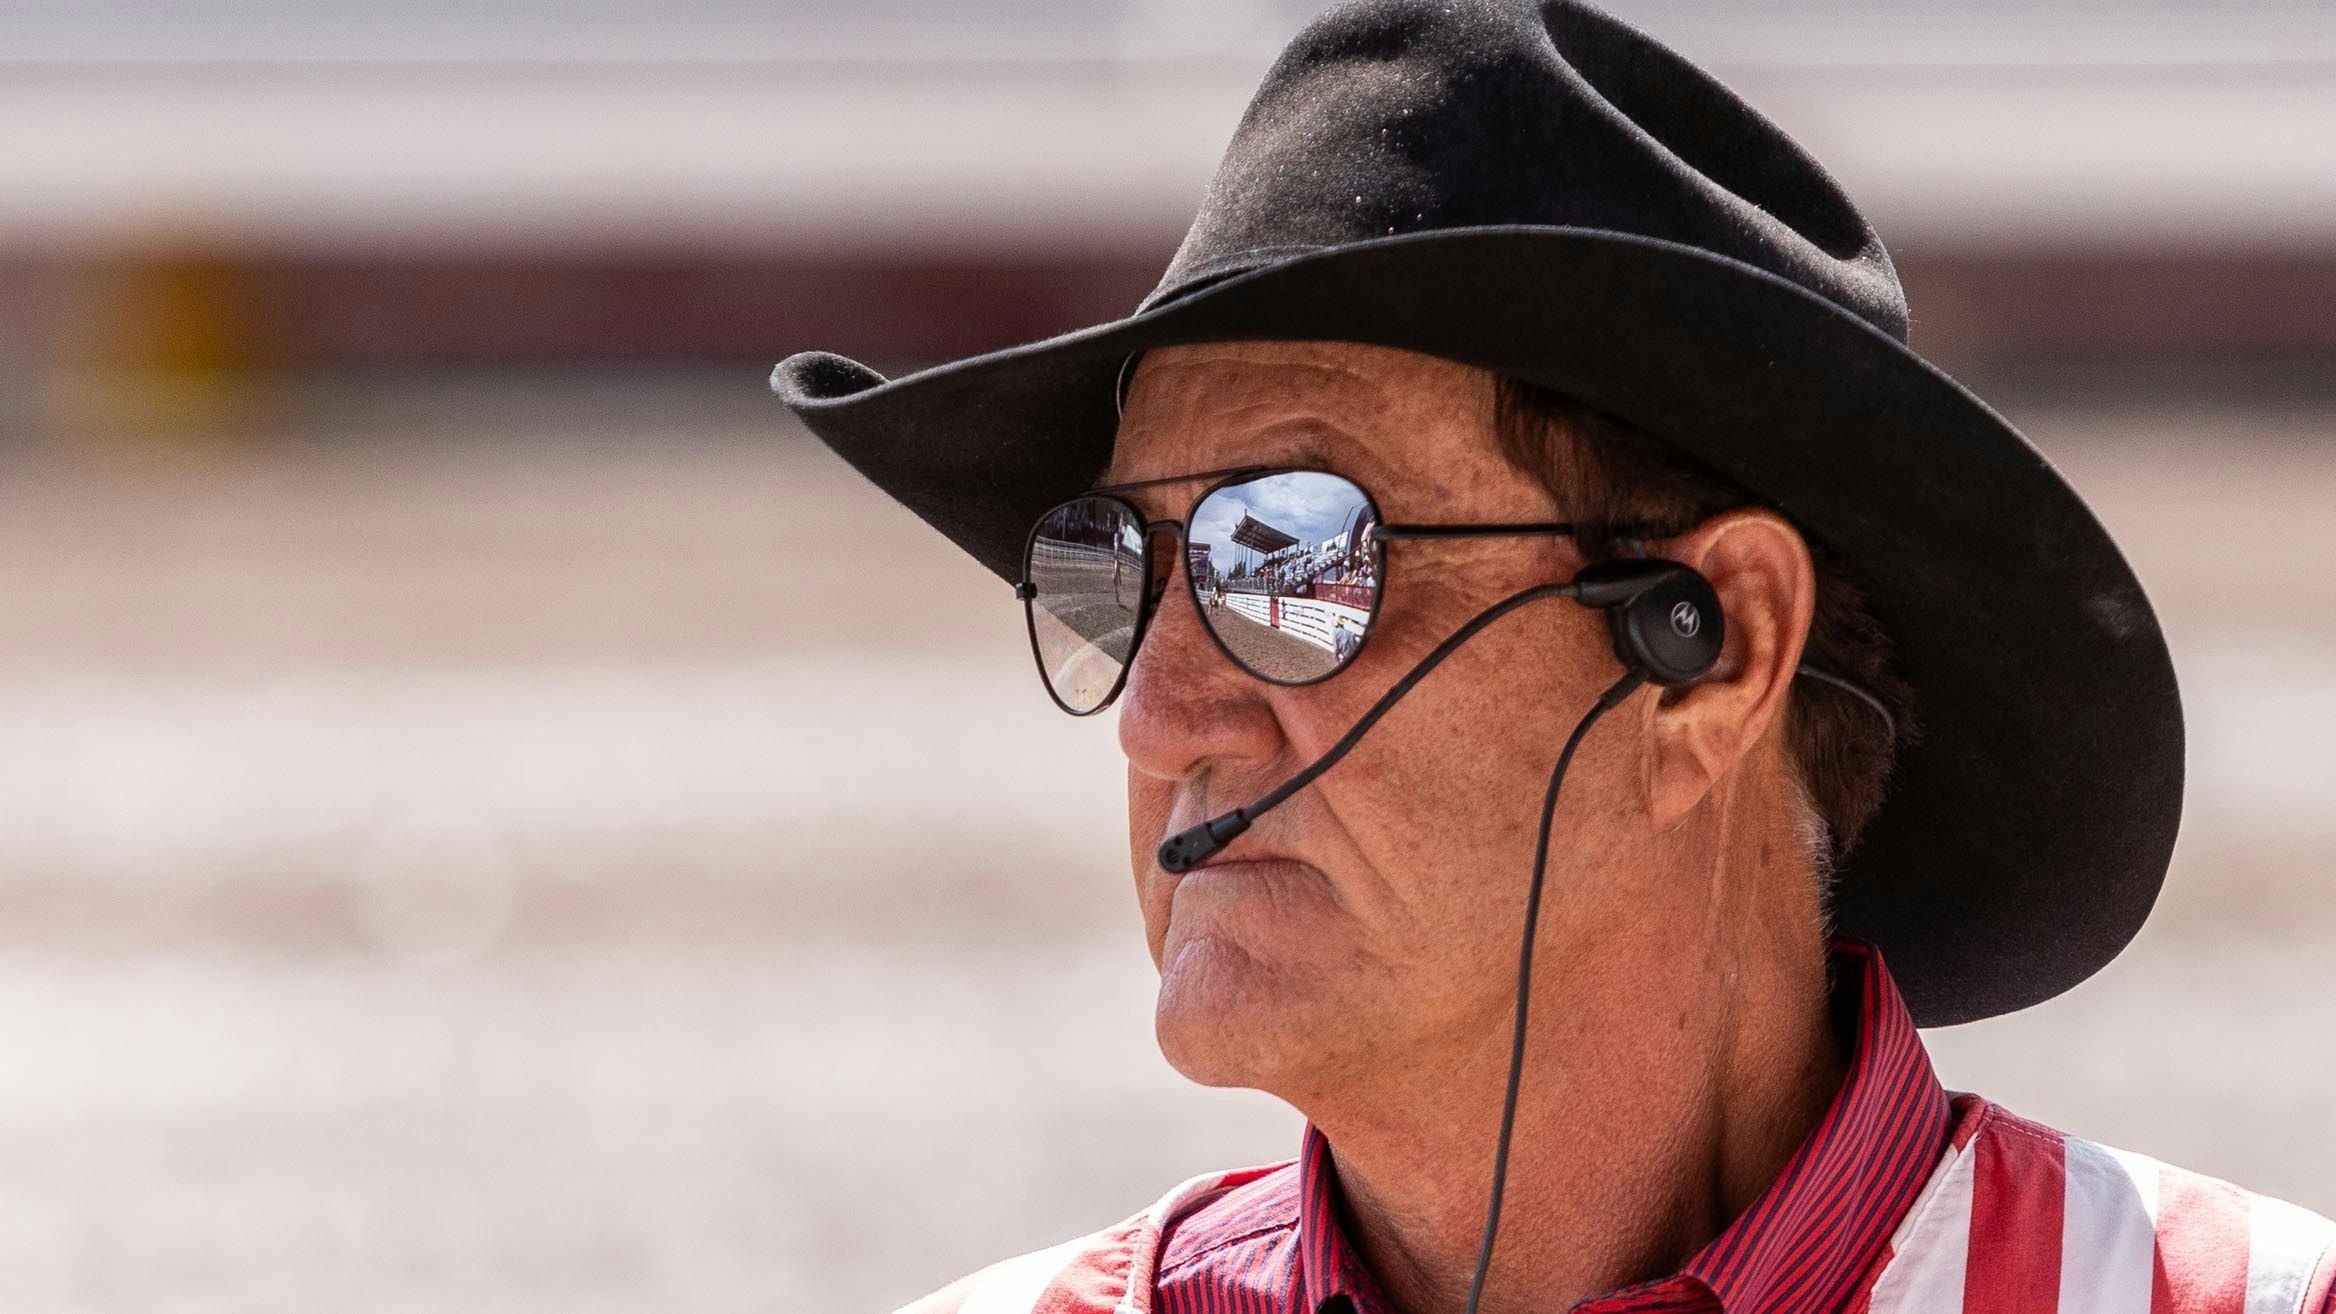 Arena and grand stands reflect in Cowboy’s sunglasses at Cheyenne Frontier Days on July 26, 2023.